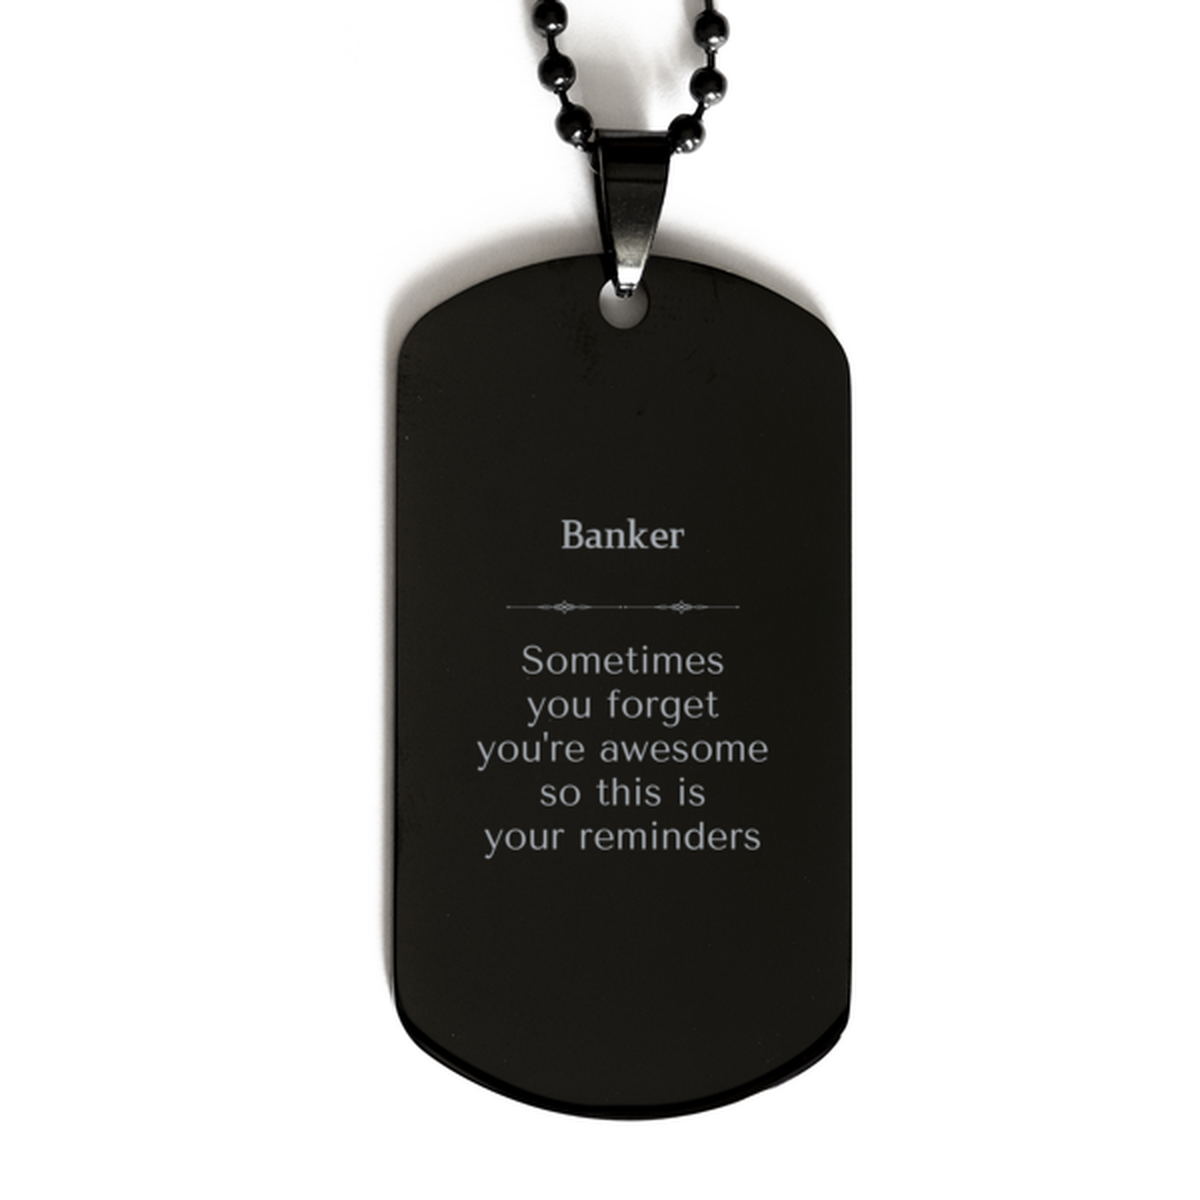 Sentimental Banker Black Dog Tag, Banker Sometimes you forget you're awesome so this is your reminders, Graduation Christmas Birthday Gifts for Banker, Men, Women, Coworkers